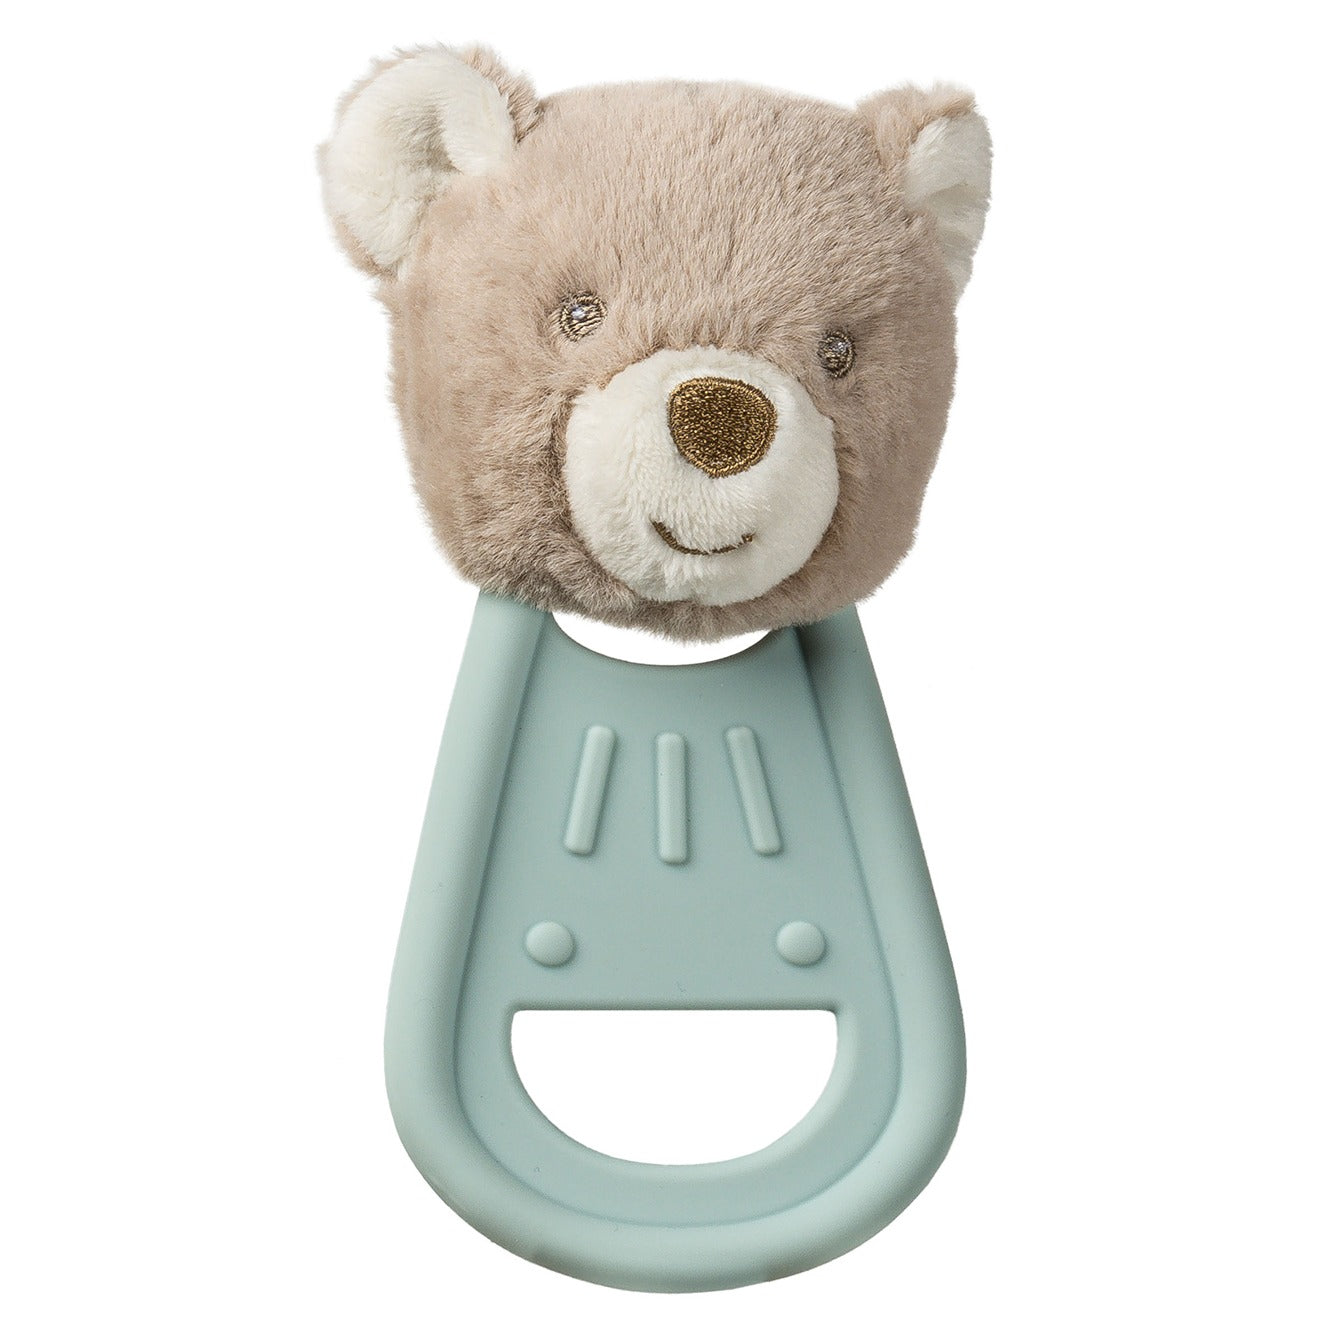 Silicone Character Teether - Teddy